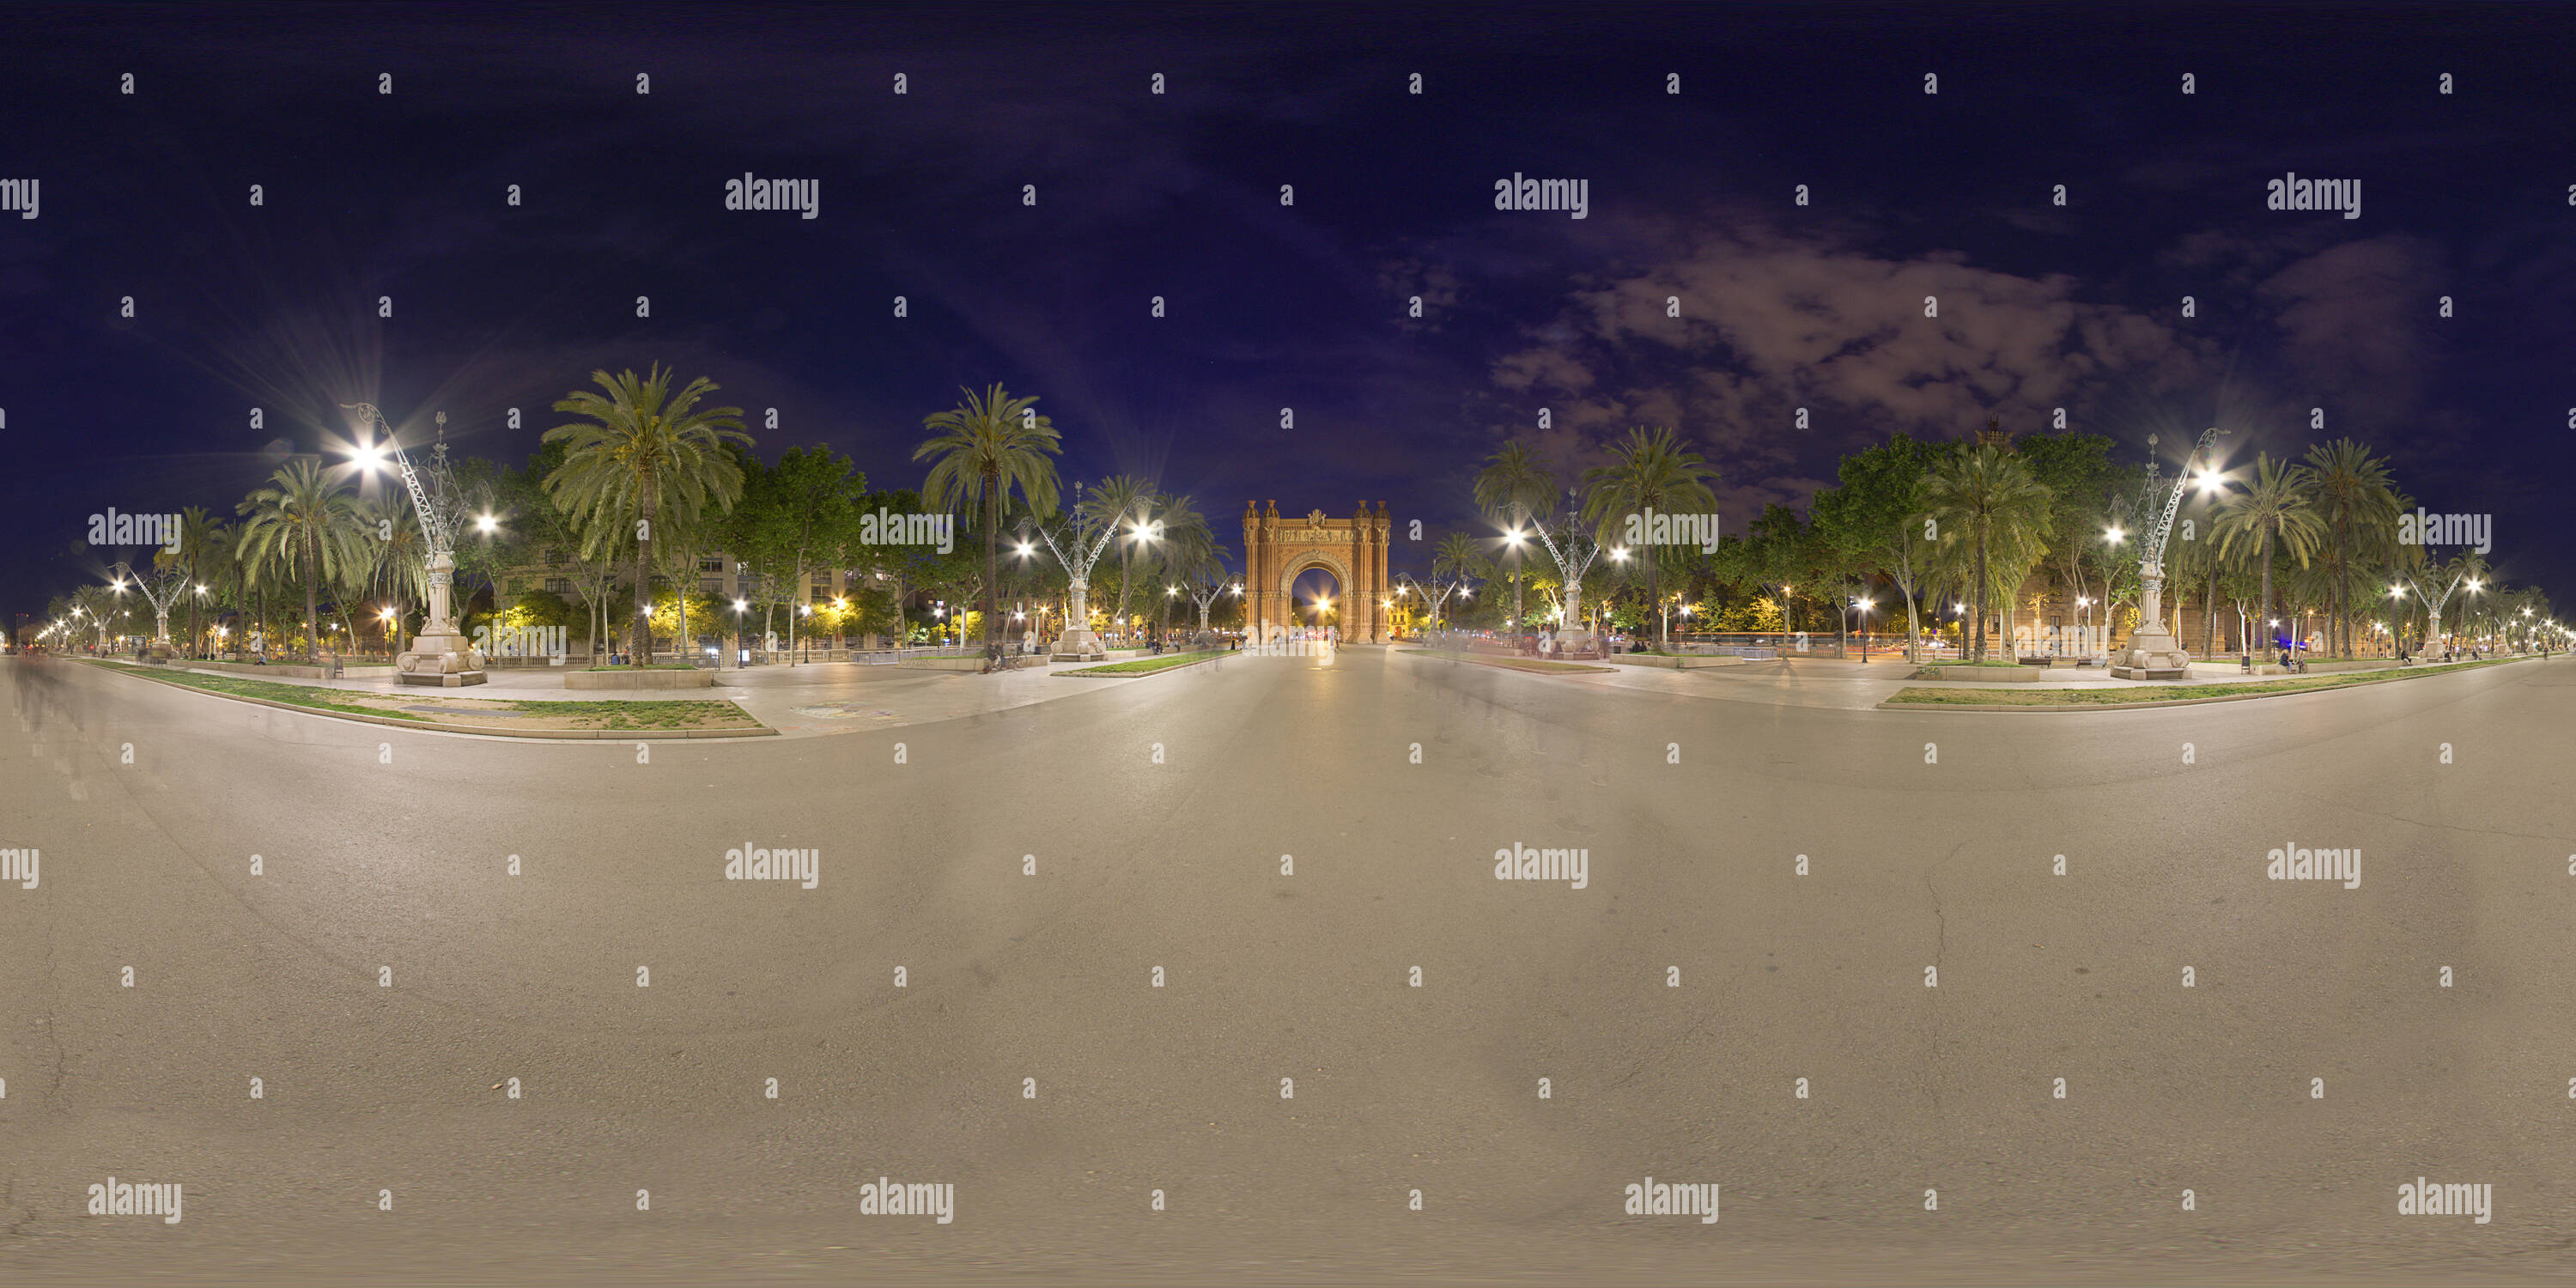 360 degree panoramic view of 360º photographs of the streets of Barcelona, Catalonia, Spain